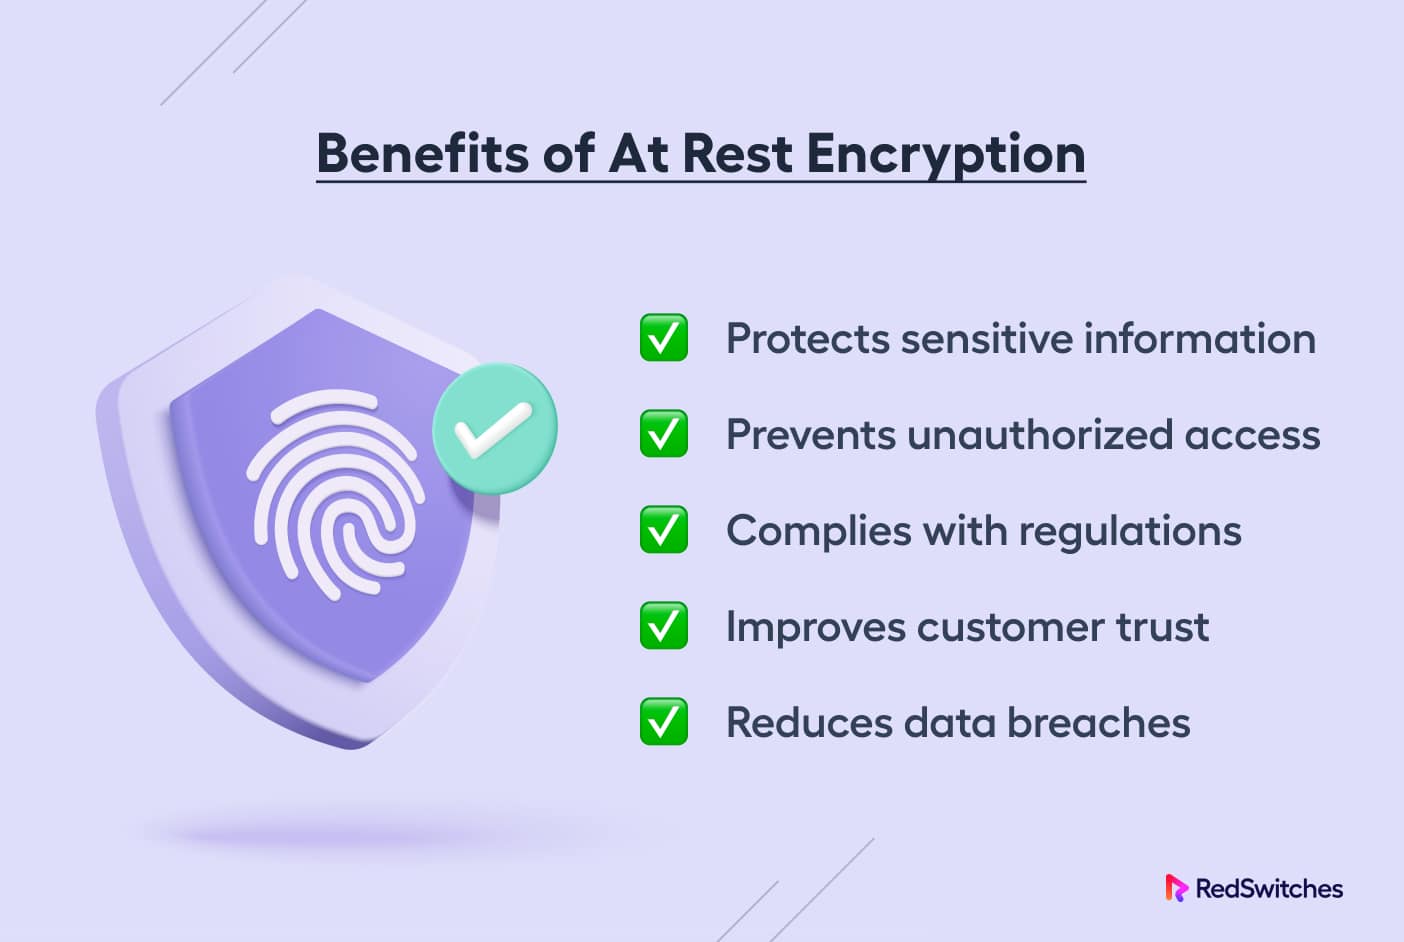 Benefits of At Rest Encryption